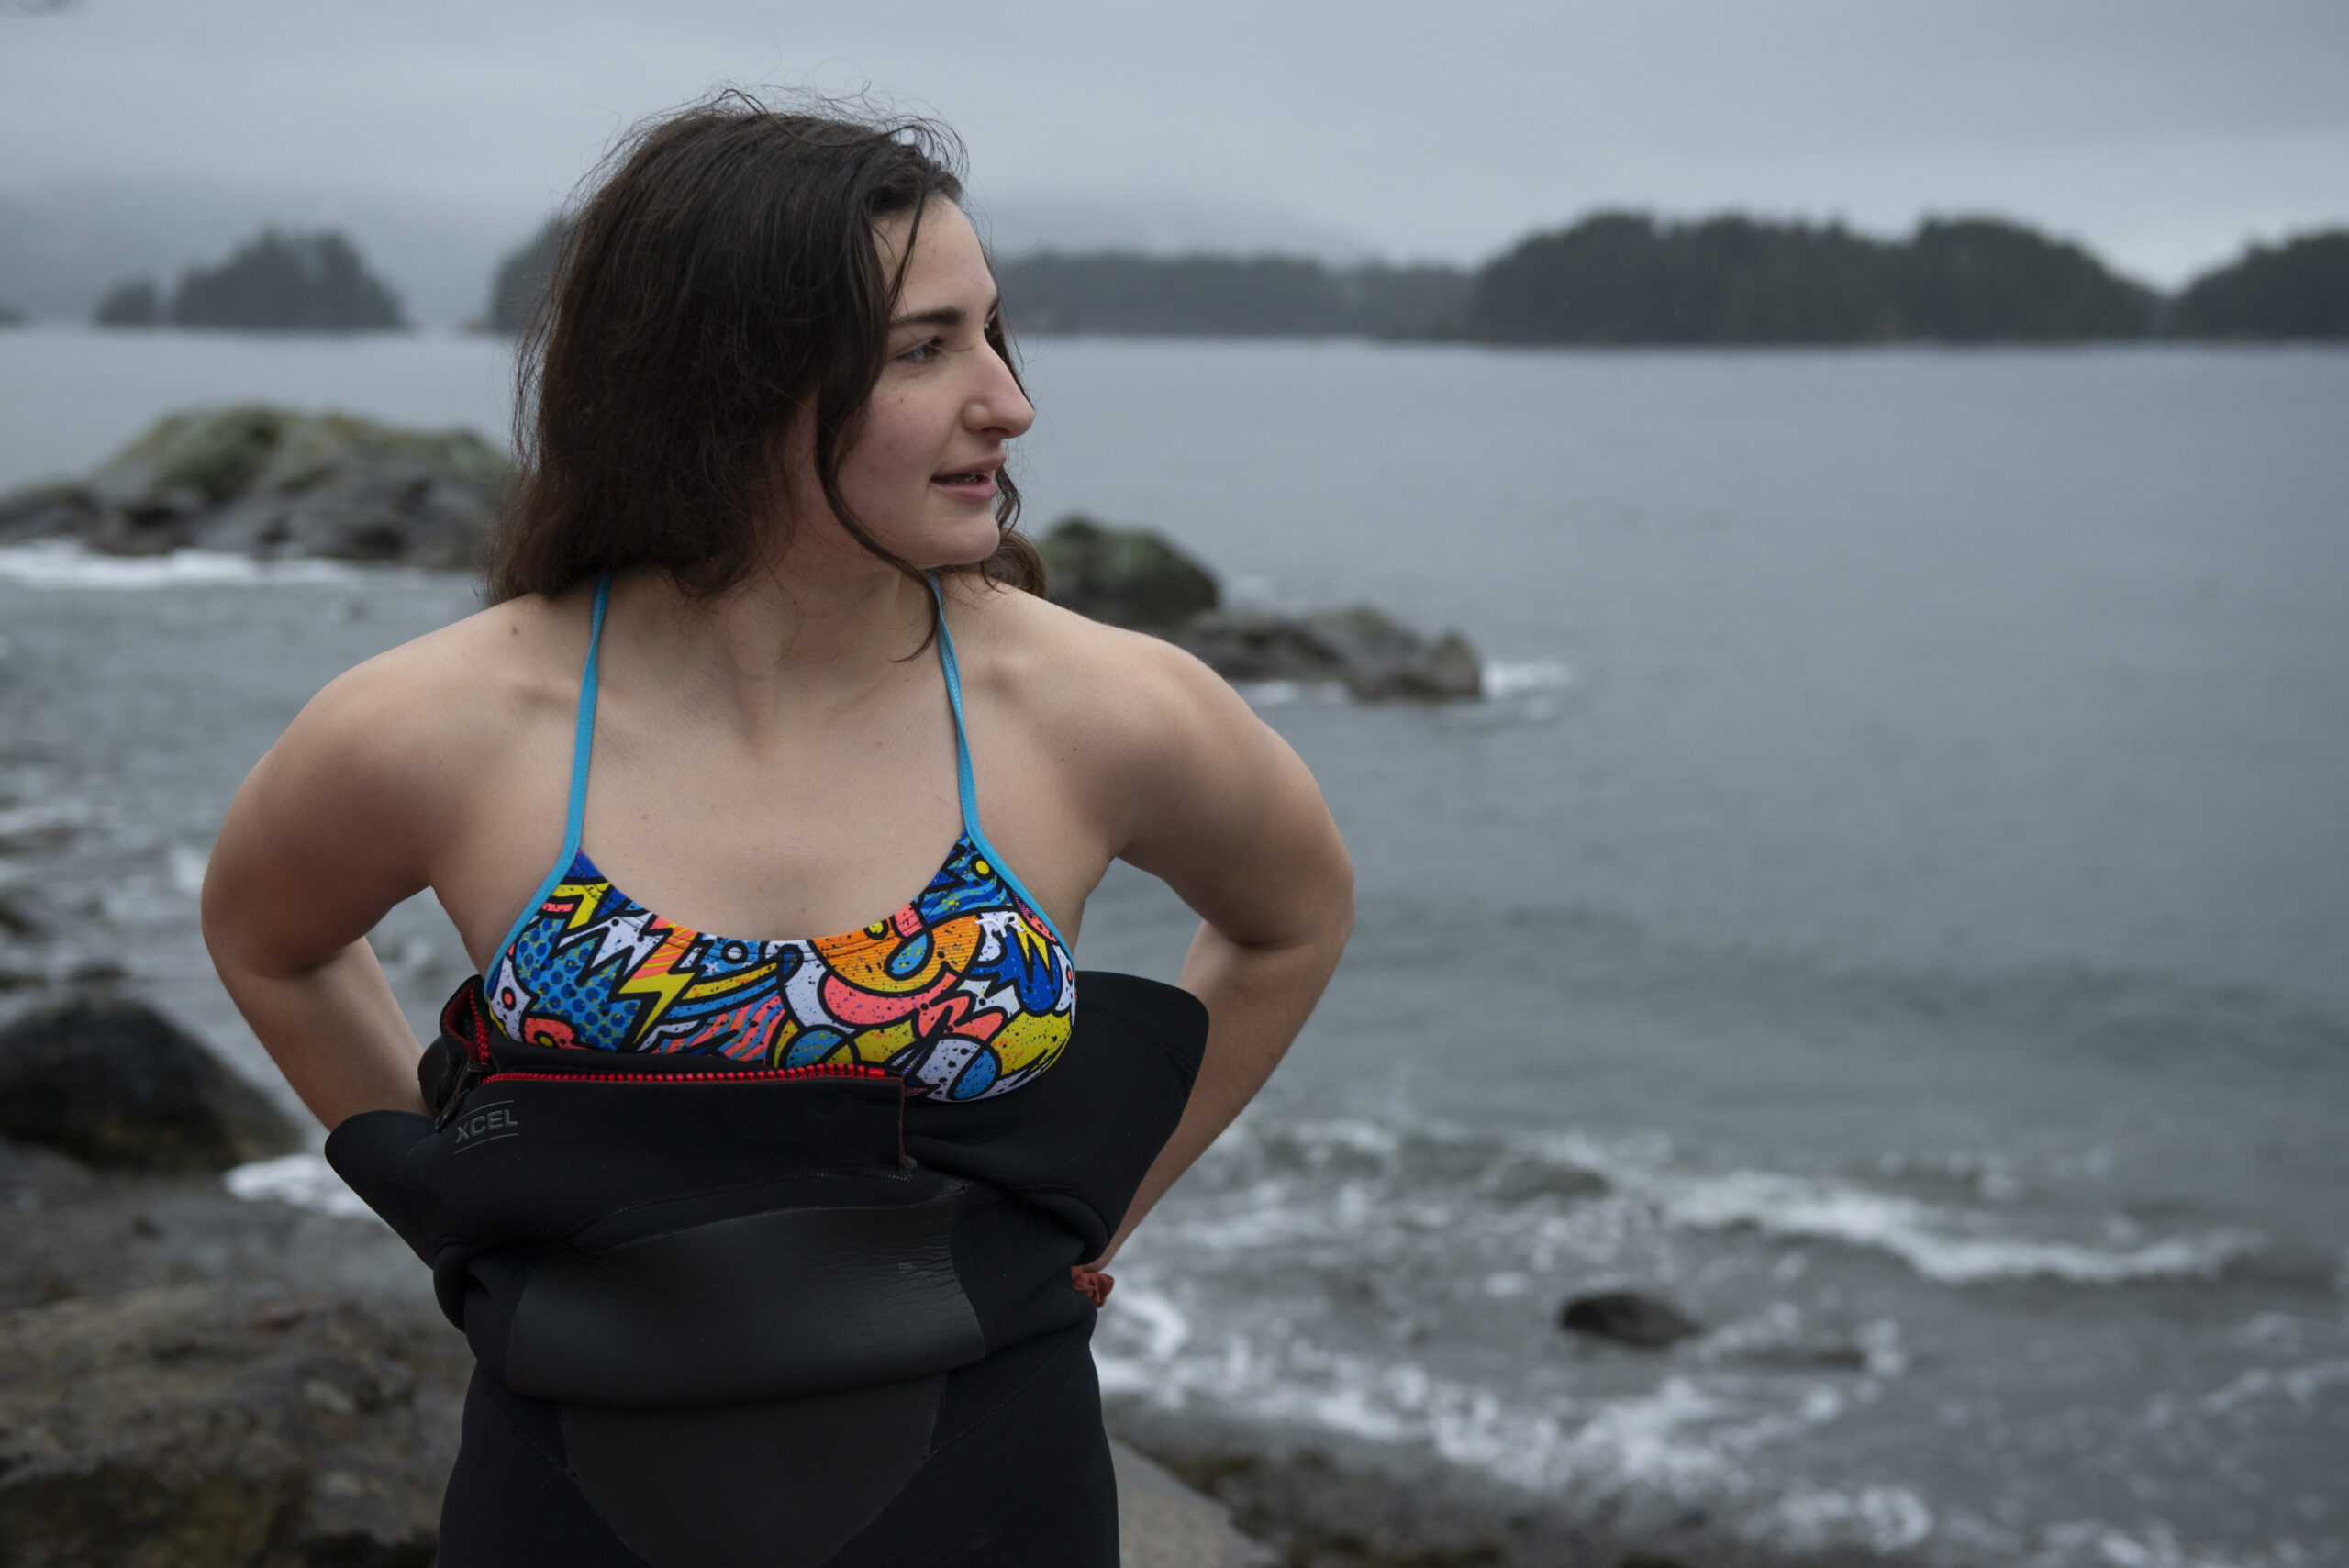 Cairn Project Ambassador AK puts on a wetsuit with a gloomy water scene behind her